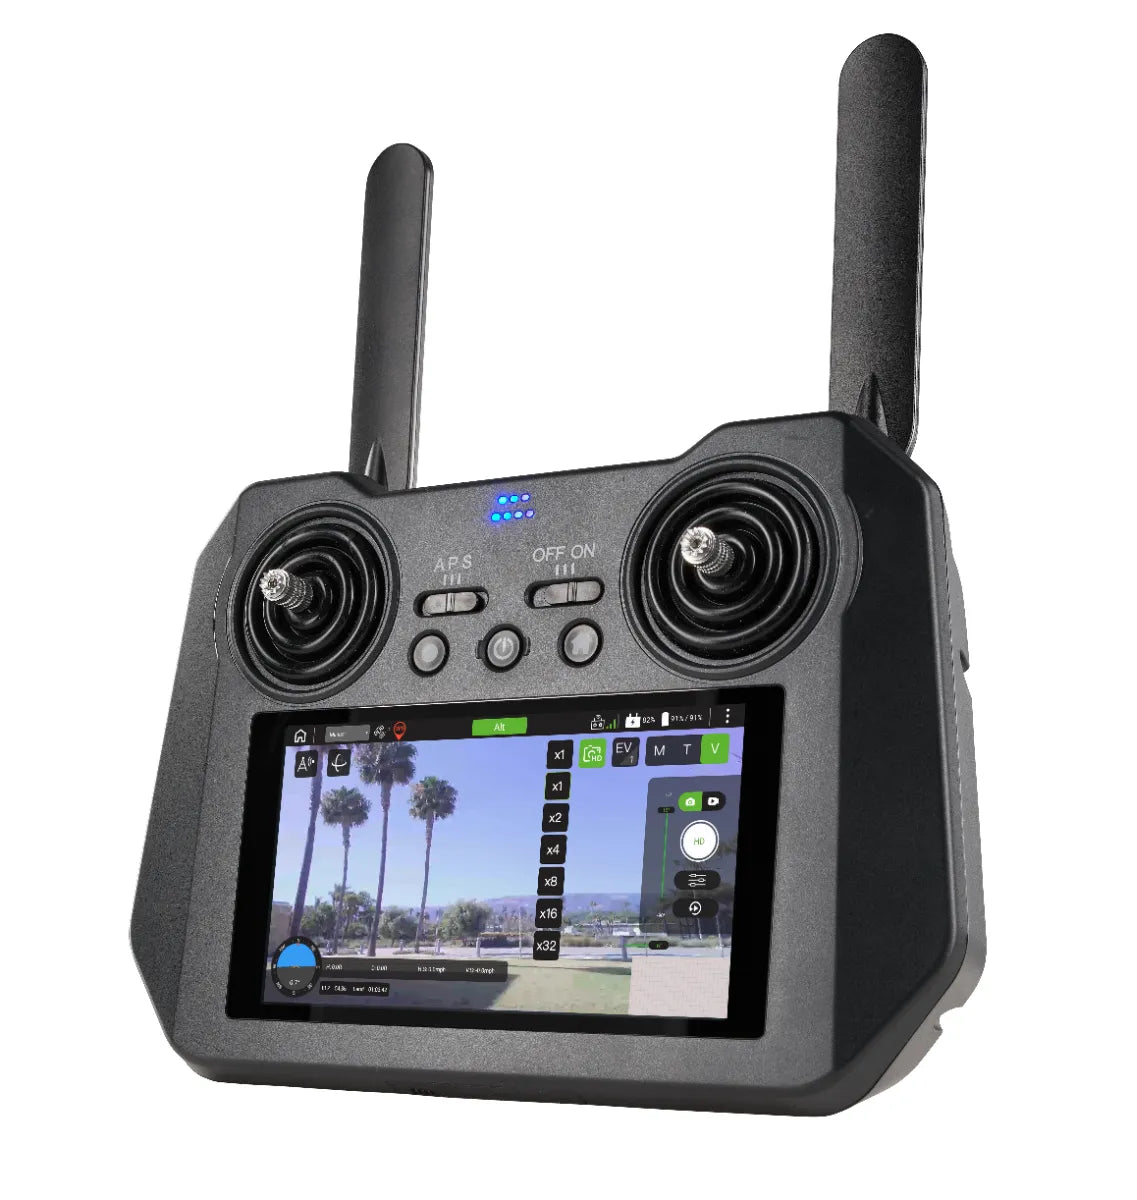 Teledyne FLIR SIRAS Drone - Professional Drone With Thermal and Visible Camera Payload Teledyne FLIR Florida Drone Supply Teledyne FLIR SIRAS - FLIR Thermal and Visible Camera Payload Drone